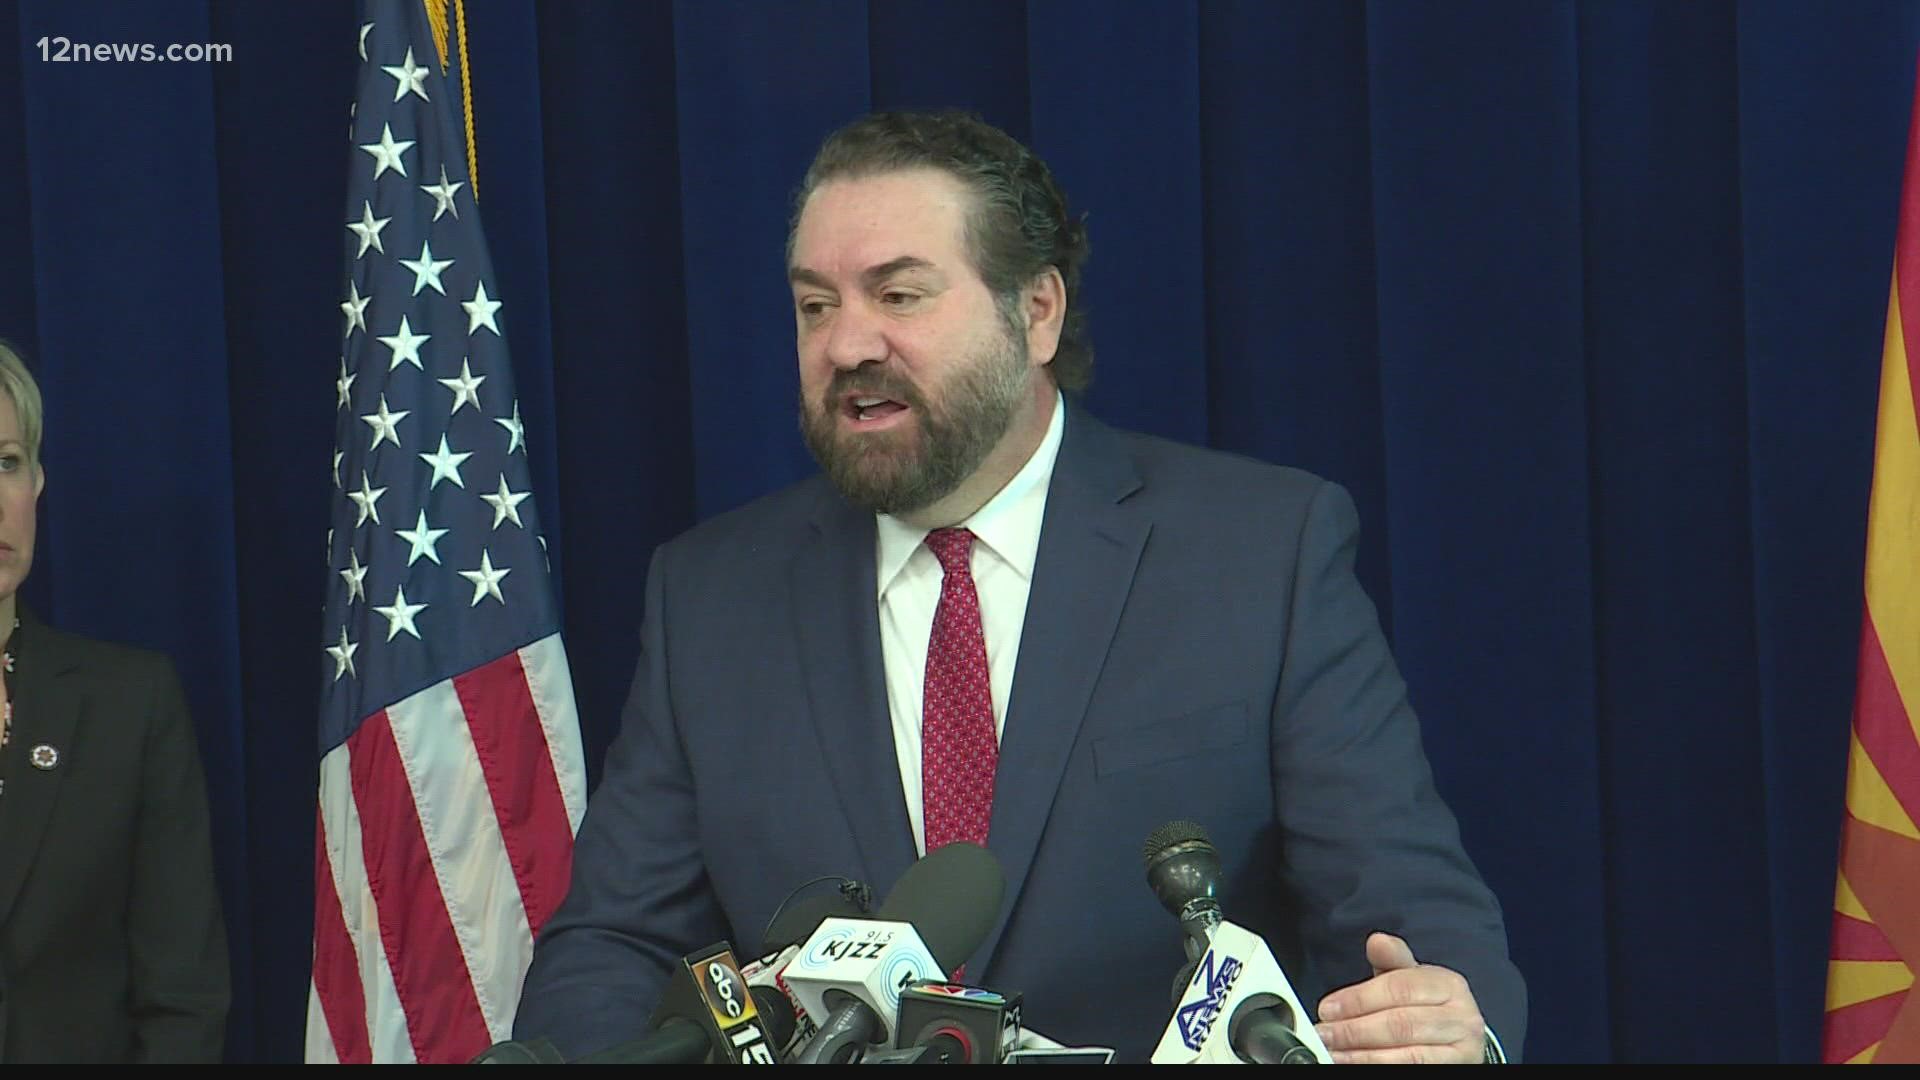 Attorney General Mark Brnovich said Maricopa County is at risk of losing state funding if they do not comply with the latest subpoena for election-related materials.